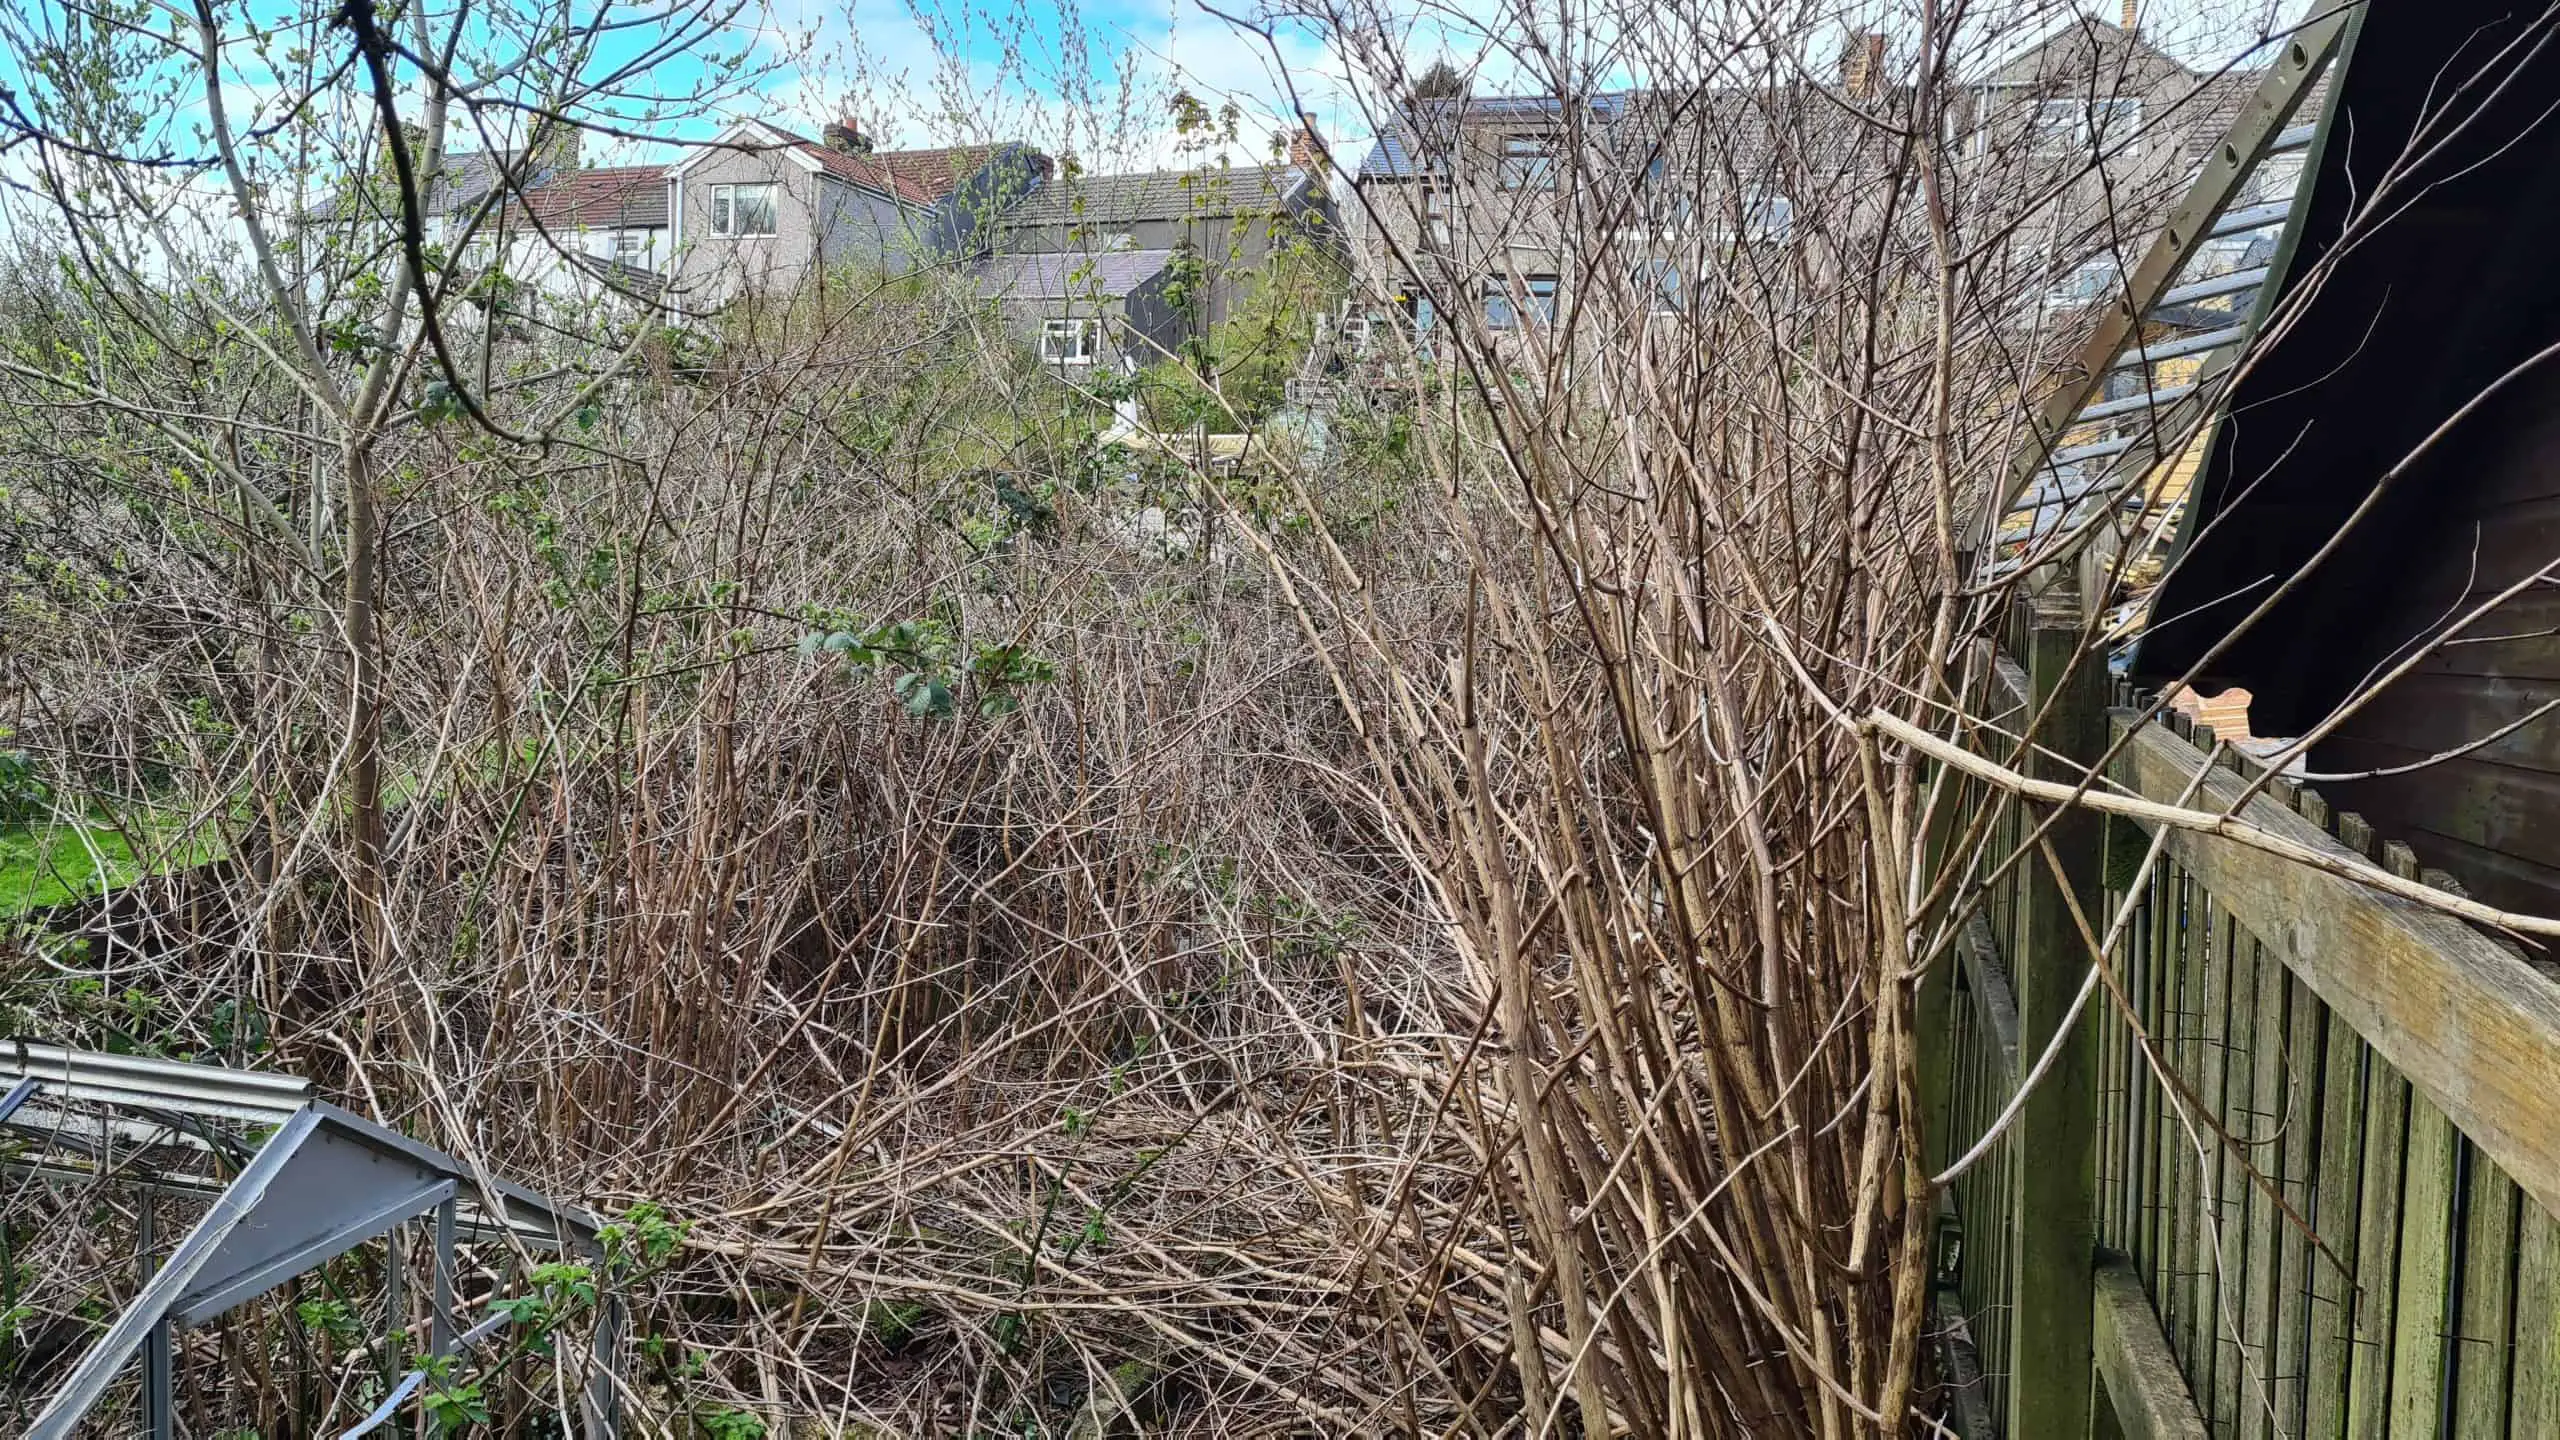 Japanese Knotweed Removal by Home Insurance is one of the biggest concerns